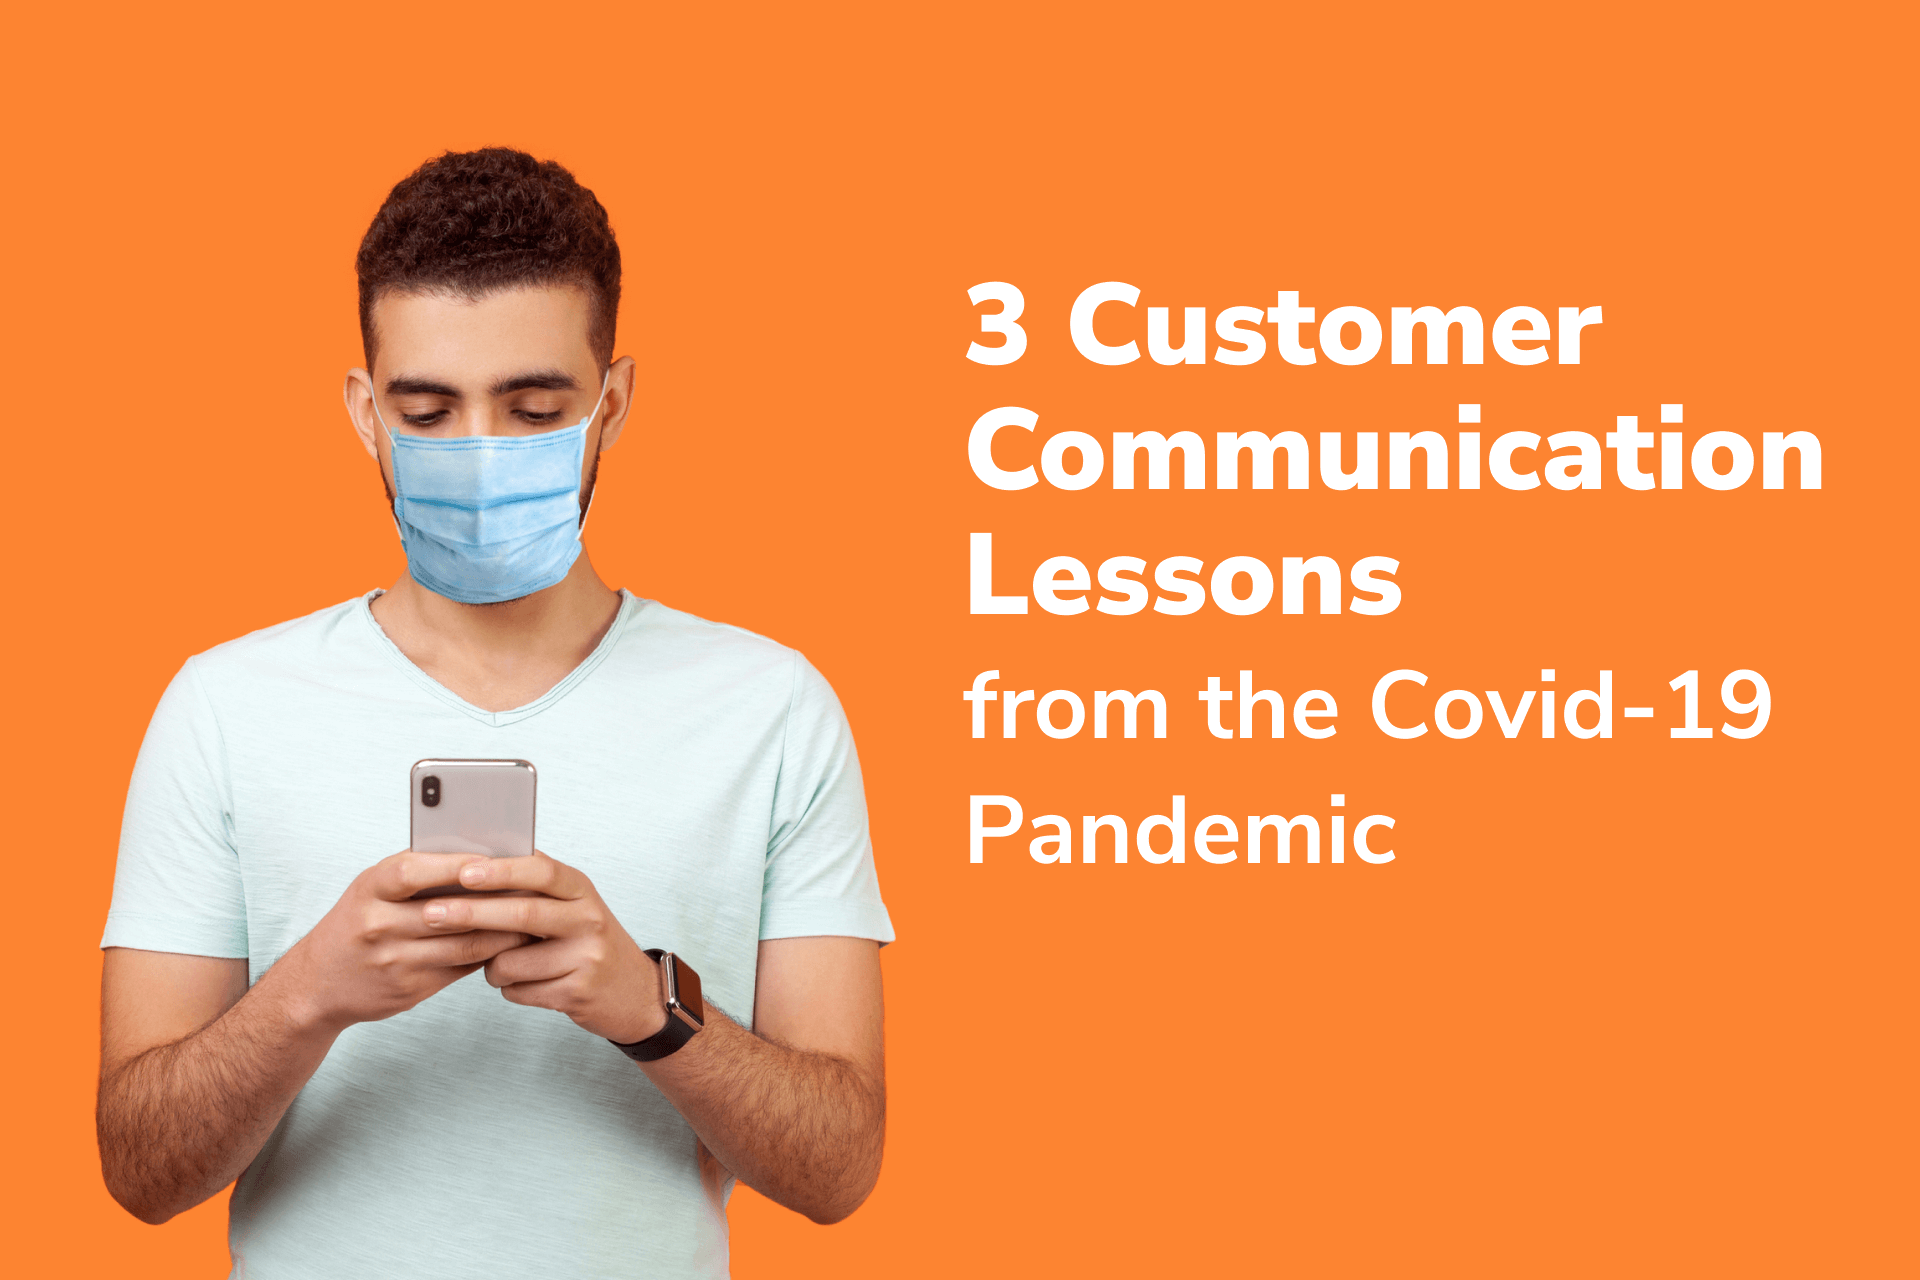 3 Customer Communication Lessons from the COVID-19 Pandemic